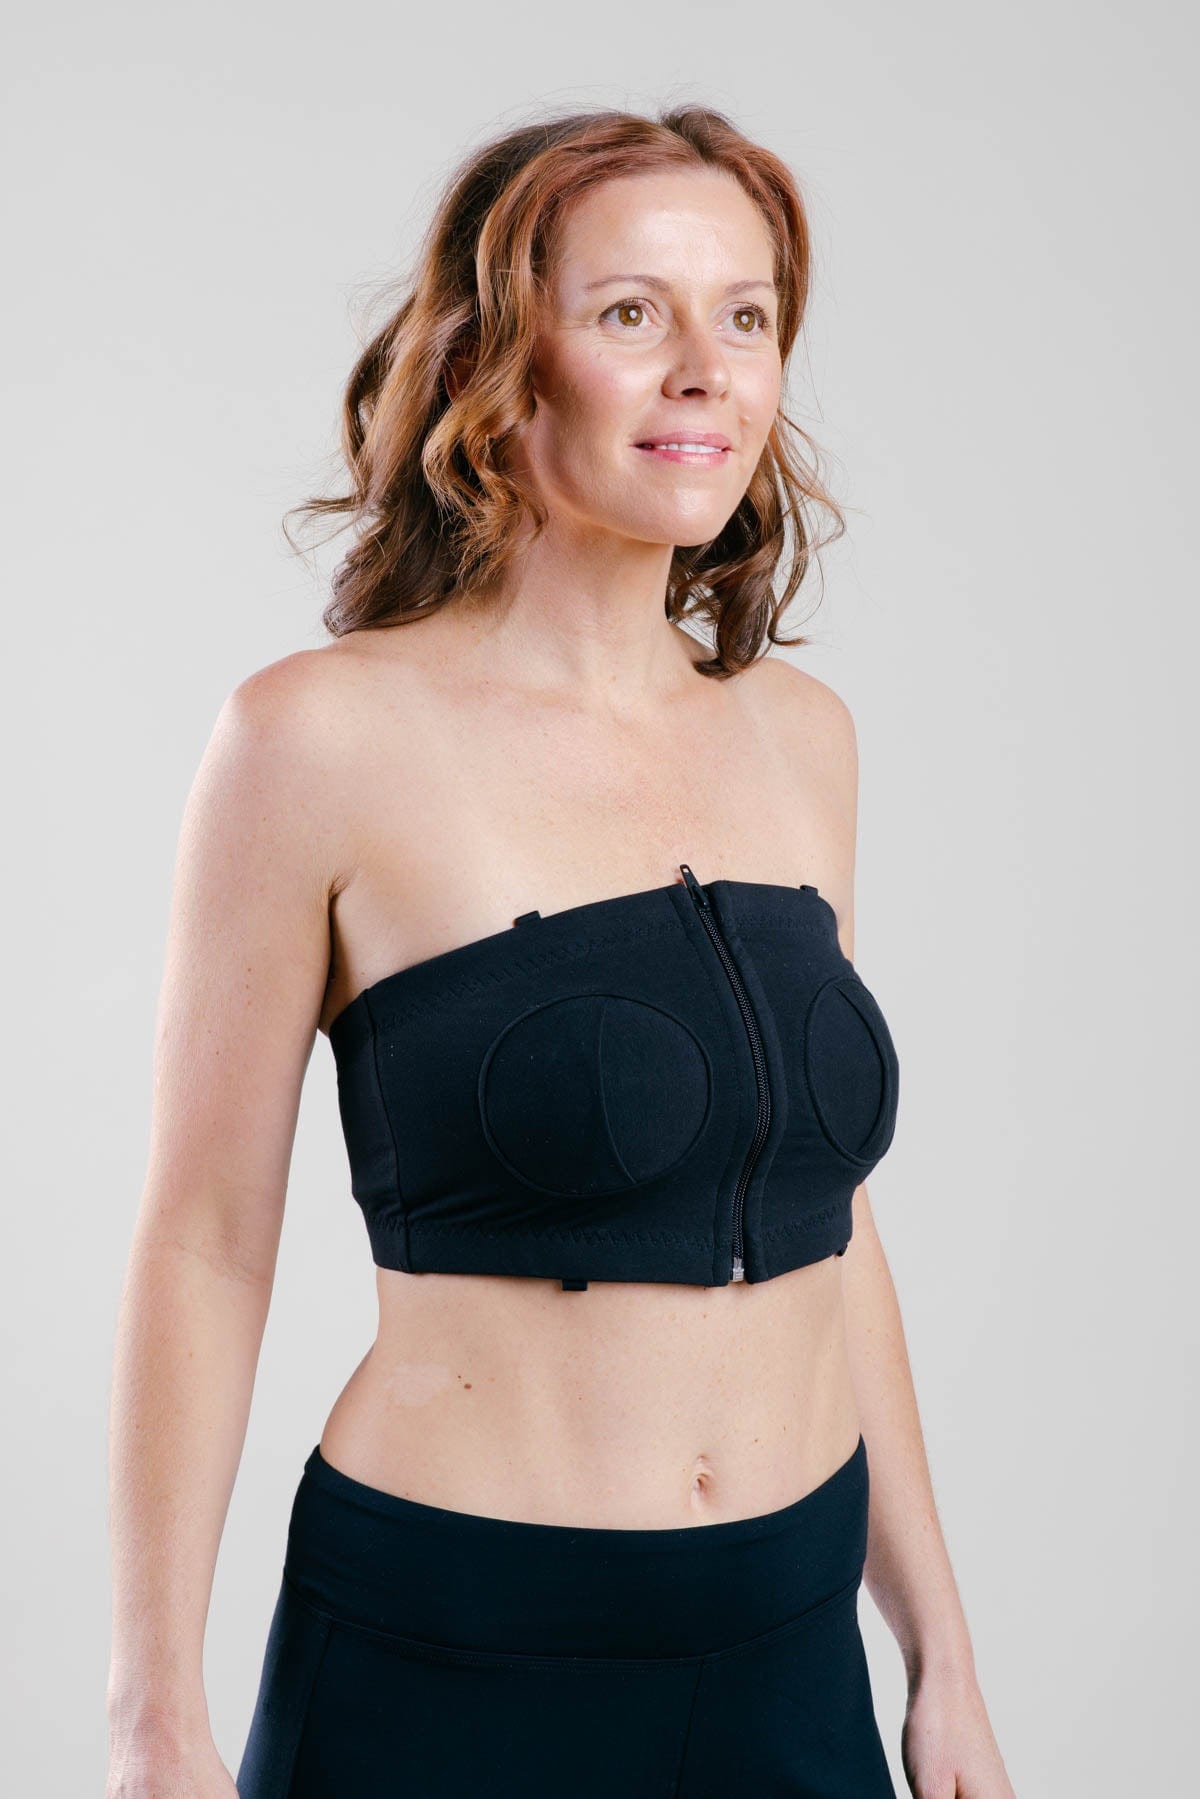 Simple Wishes Signature Hands Free Pumping Bra, Patented, Pink, X-Small/ Large at  Women's Clothing store: Breast Feeding Pumps